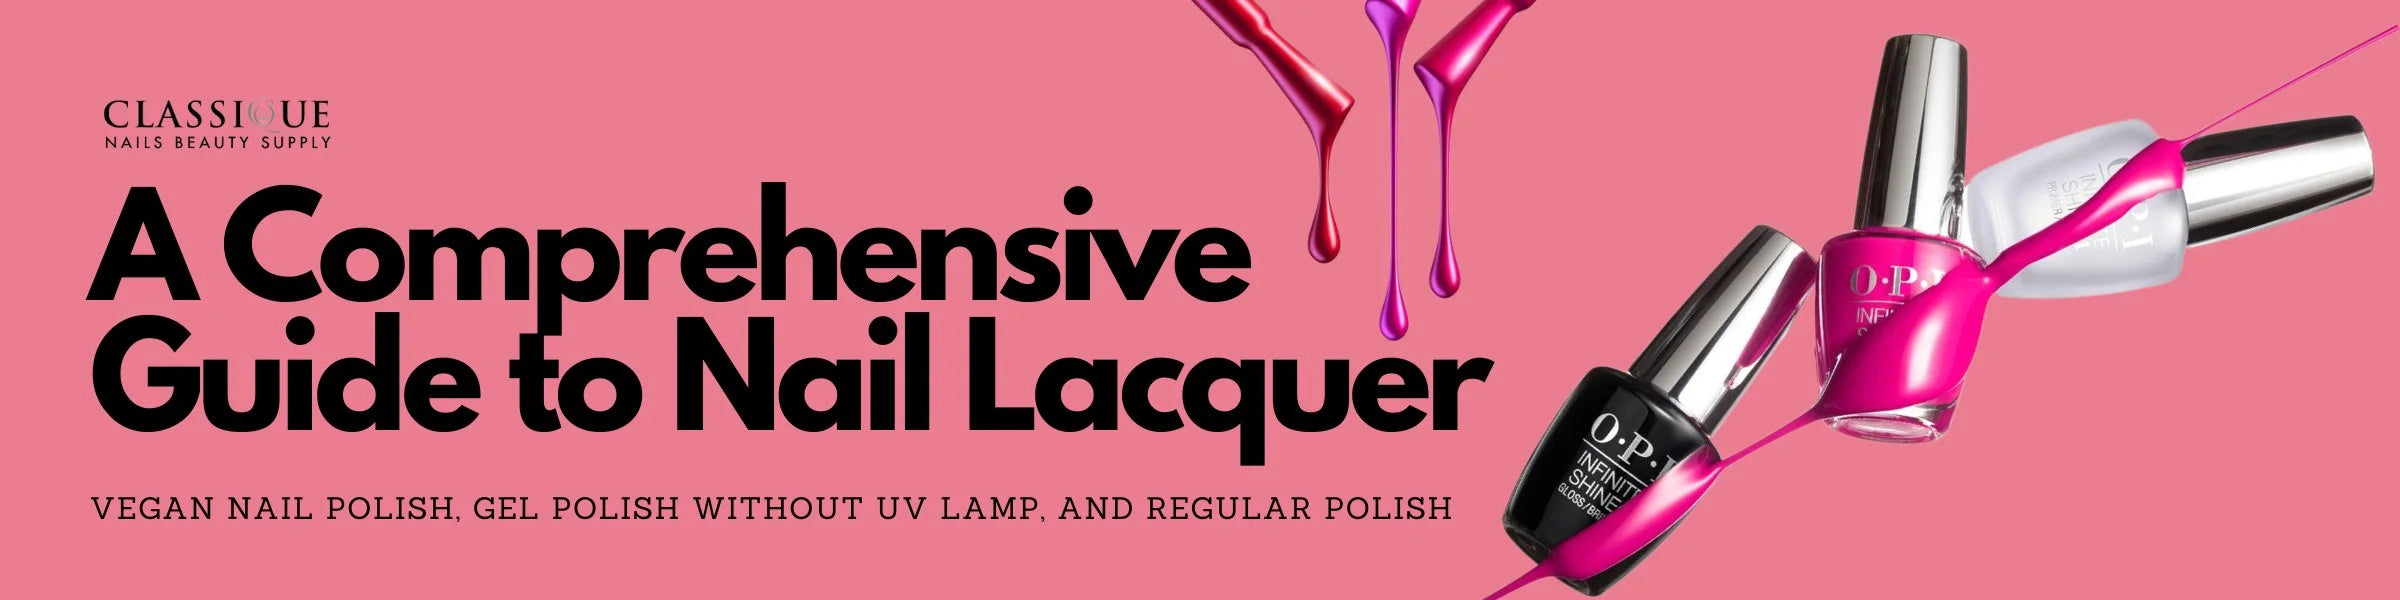 What Is Nail Lacquer? A Comprehensive Guide to Lacquer Nail Polish